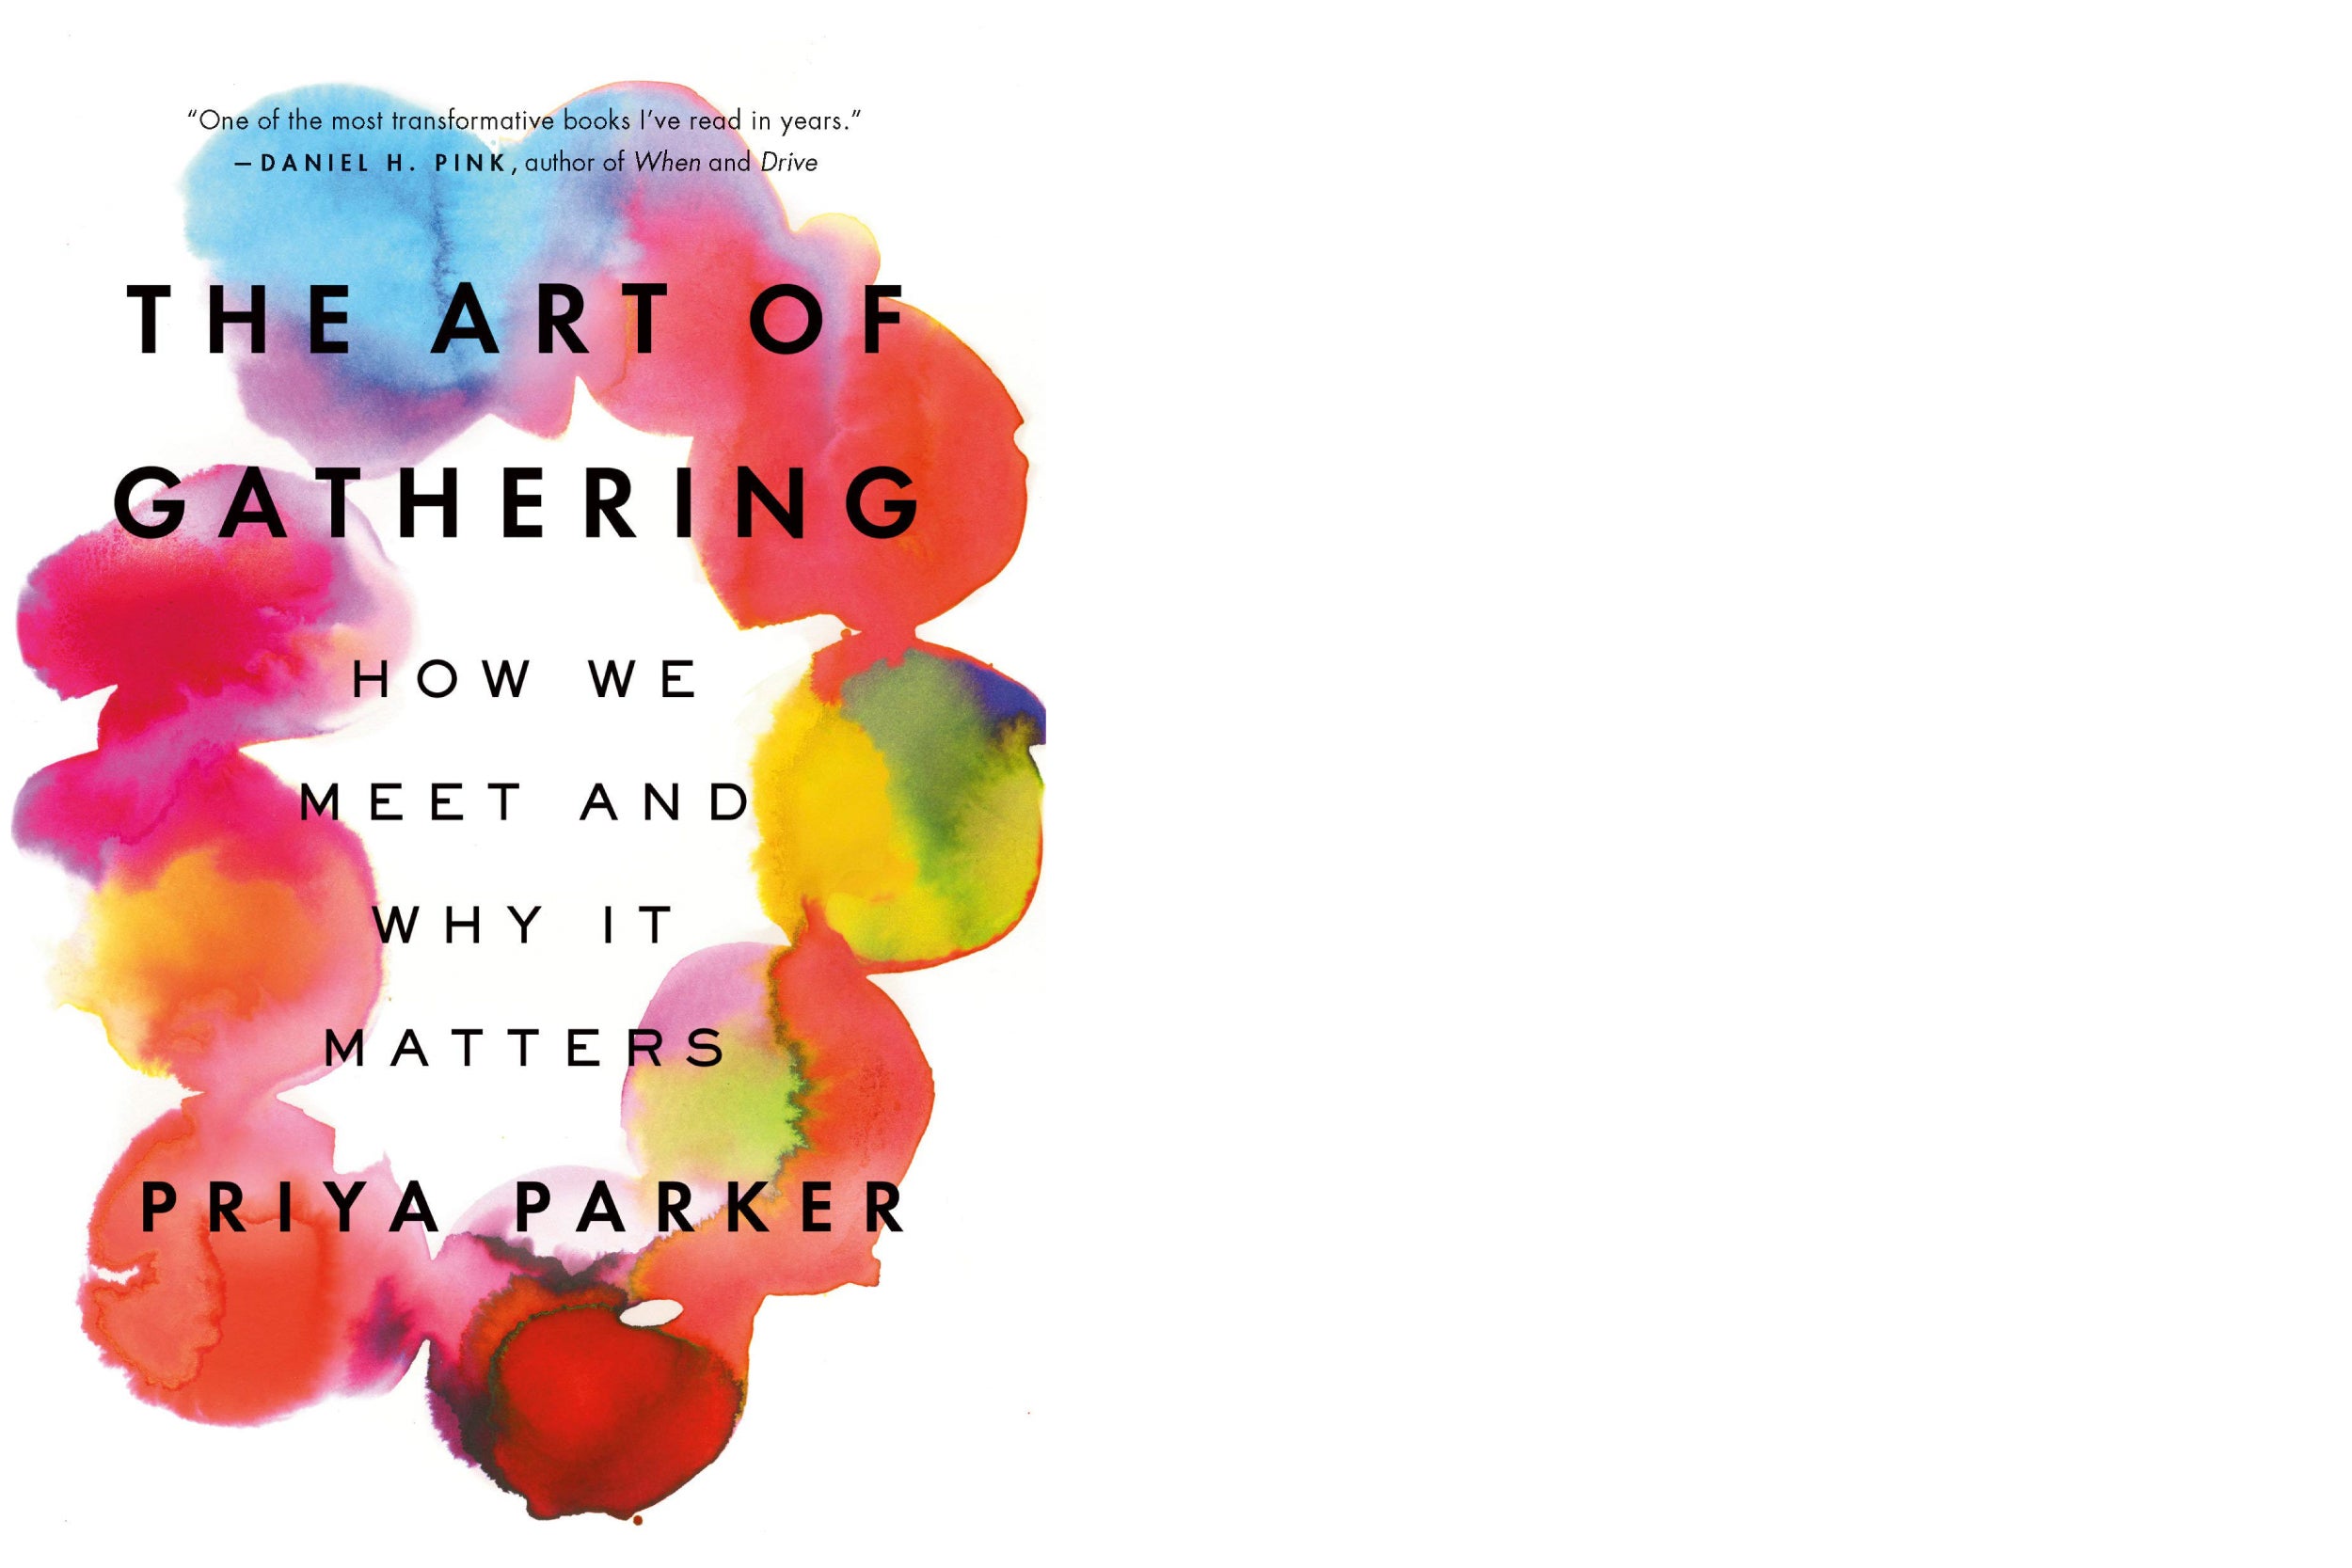 Book cover: “The Art of Gathering: How We Meet and Why It Matters” by Priya Parker.